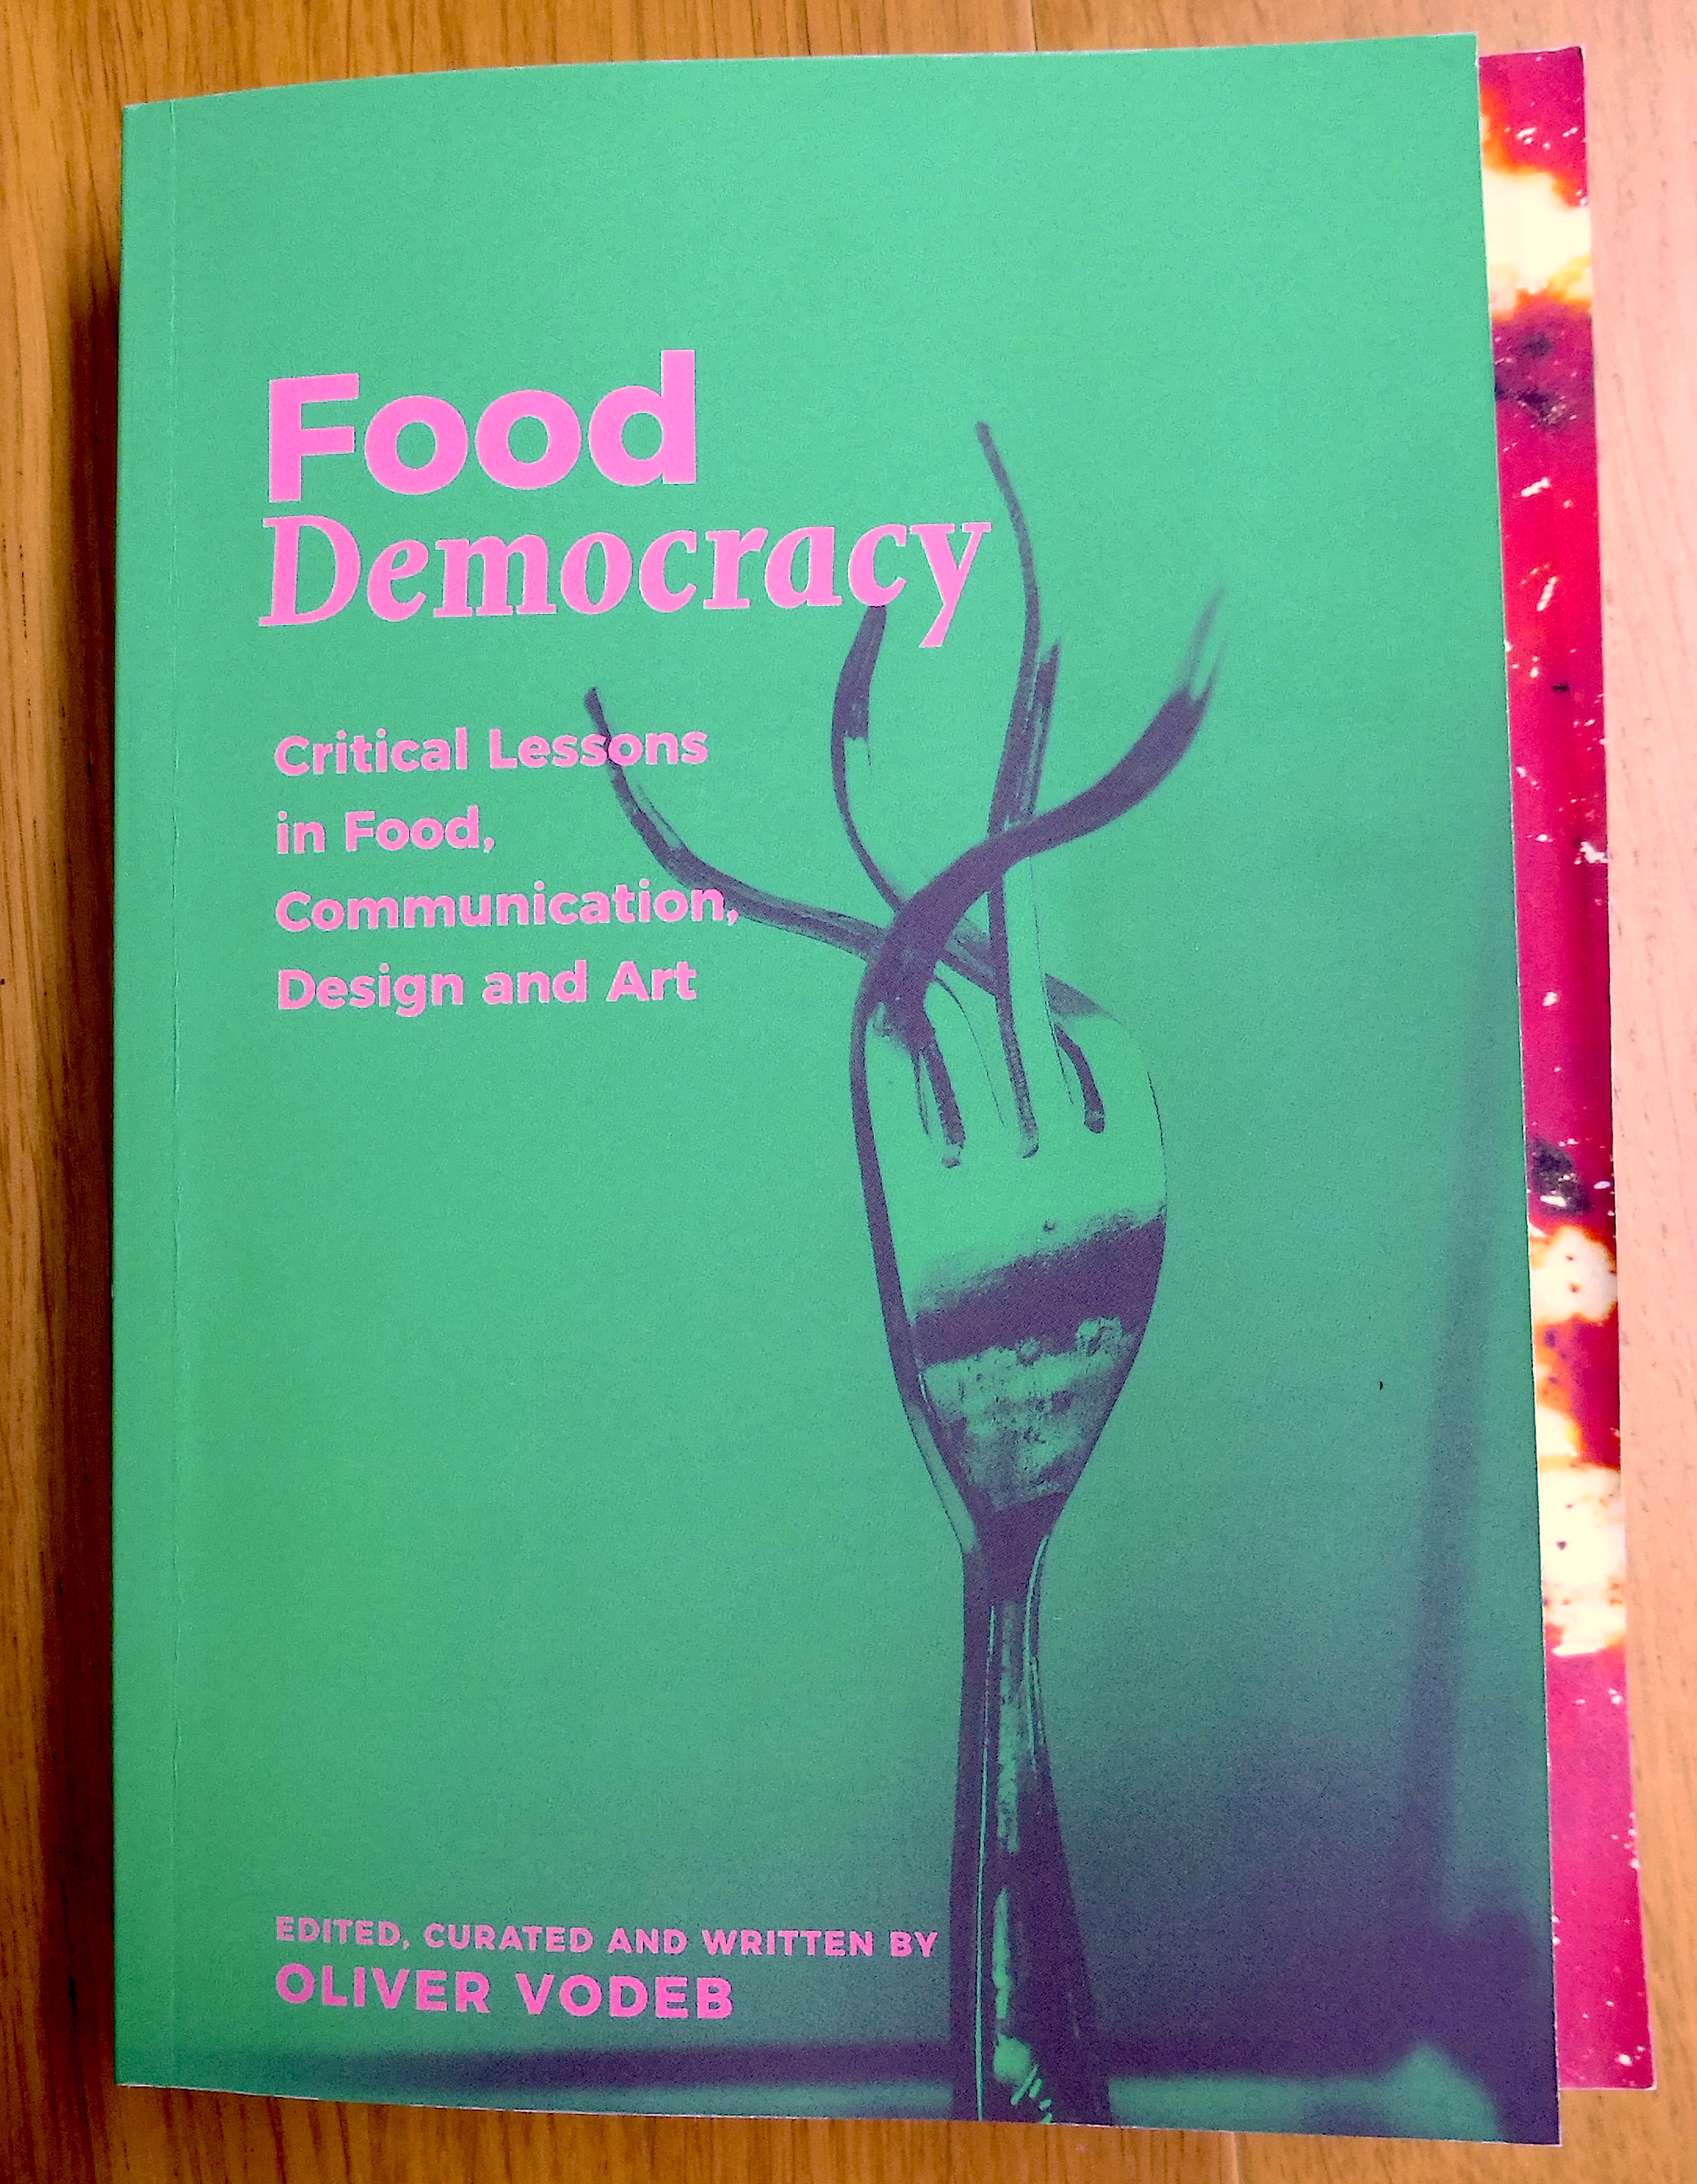 FOOD DEMOCRACY BOOK: ON PLEASURE PRAXIS AND OTHER THINGS